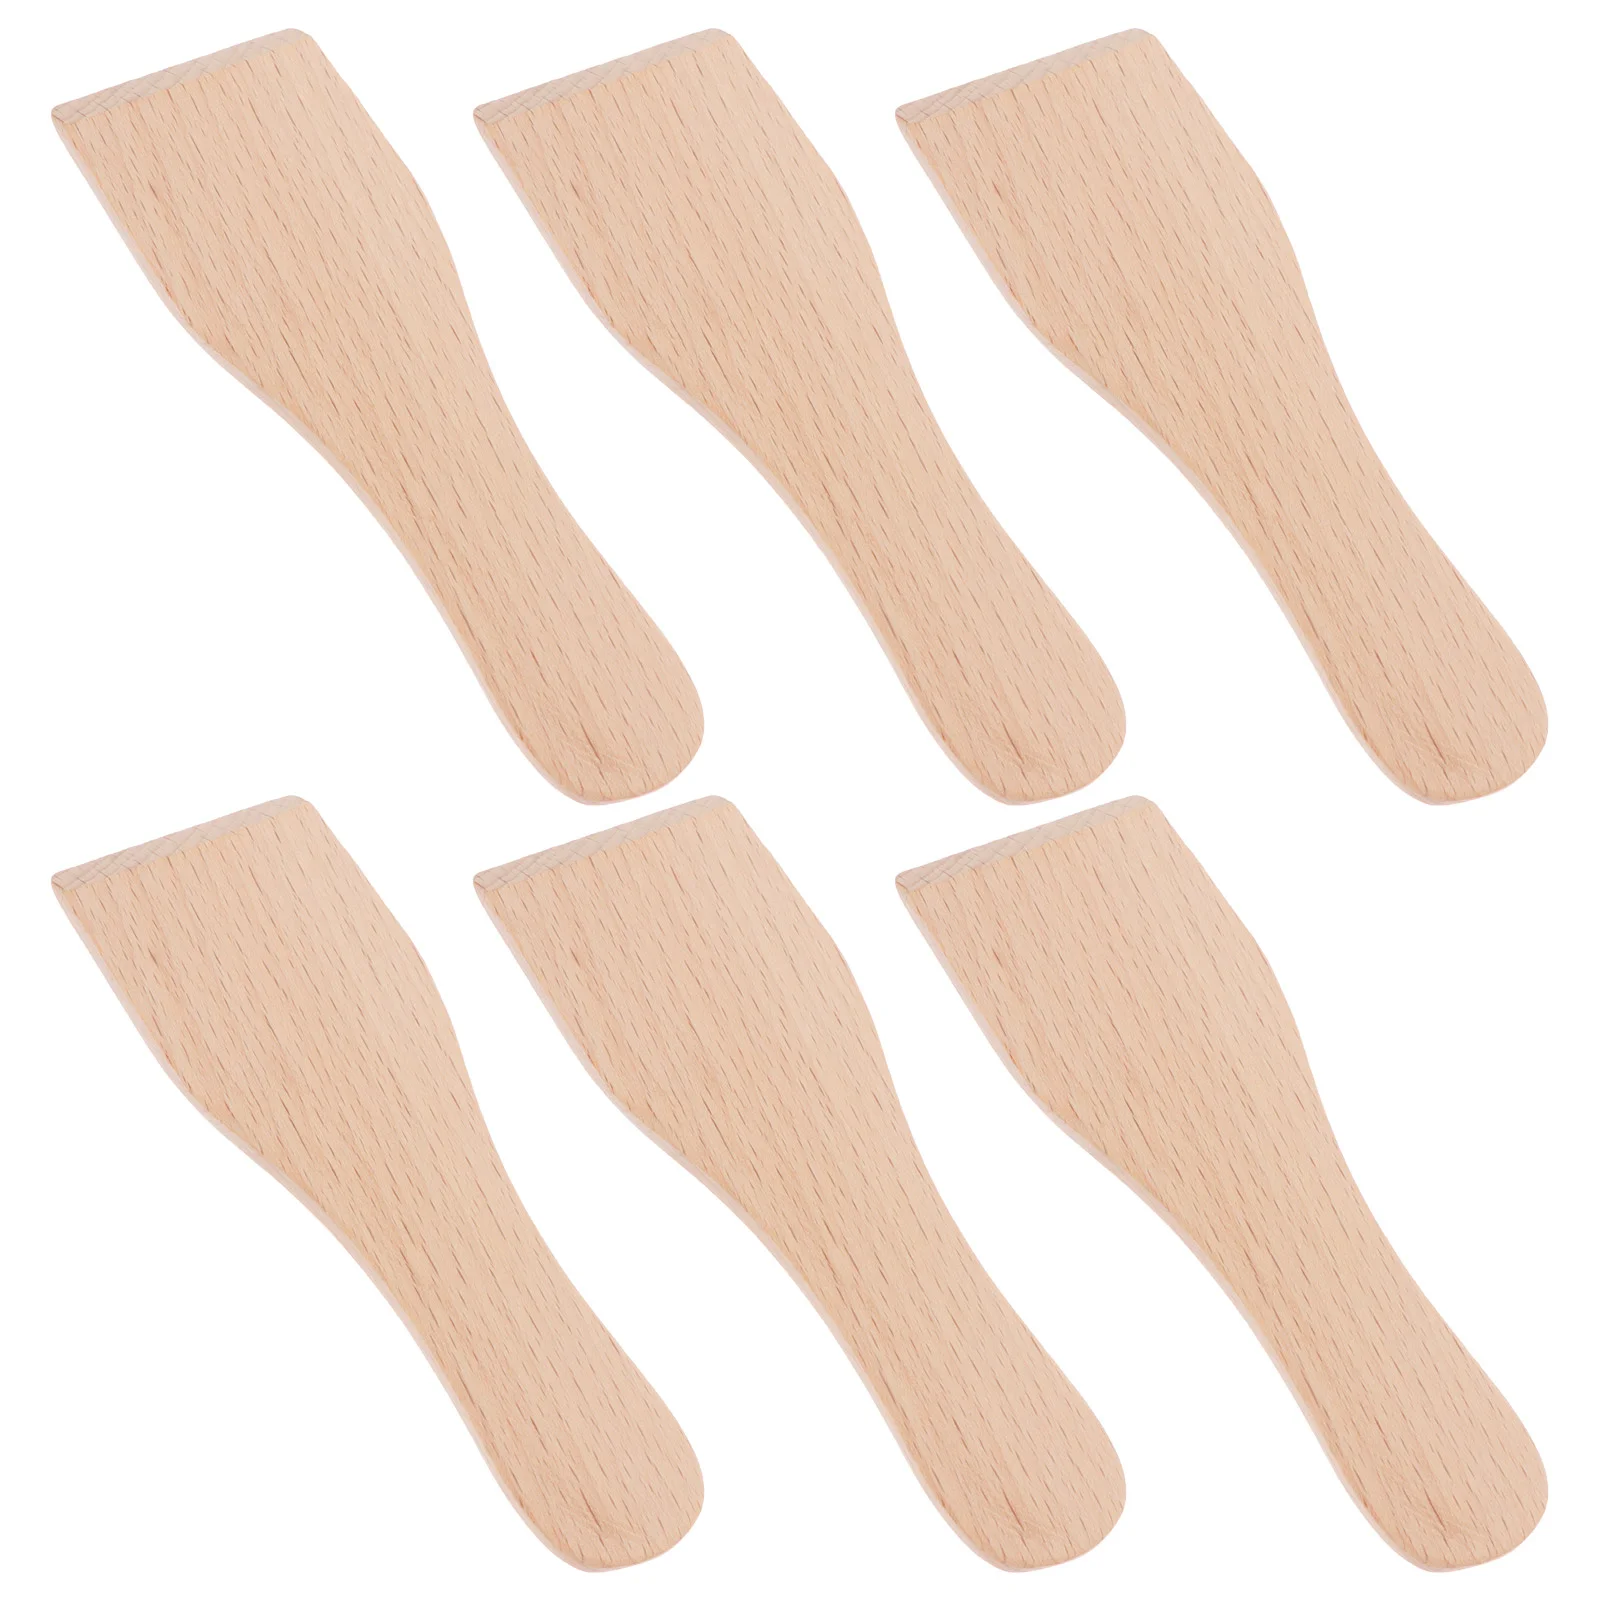 

Spatula Spreader Wood Butter Wooden Scraper Cream Kitchen Cake Icing Raclette Spatulas Spreading Cooking Frosting Turner Cheese